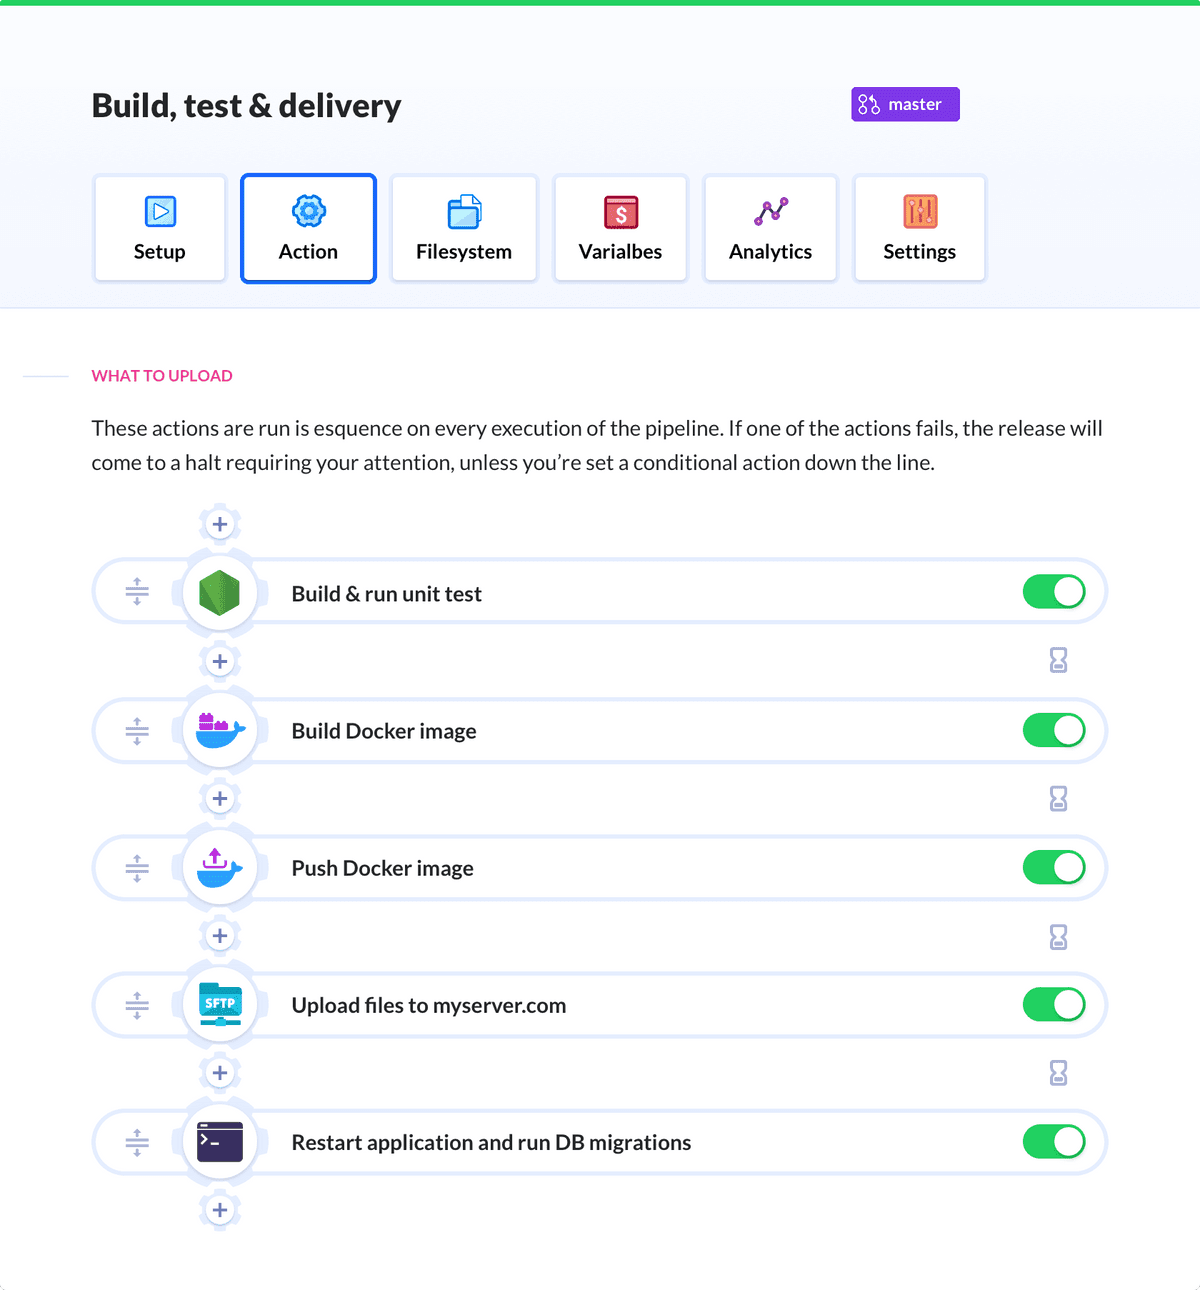 Screenshot of actions in build and delivery processes in Buddy